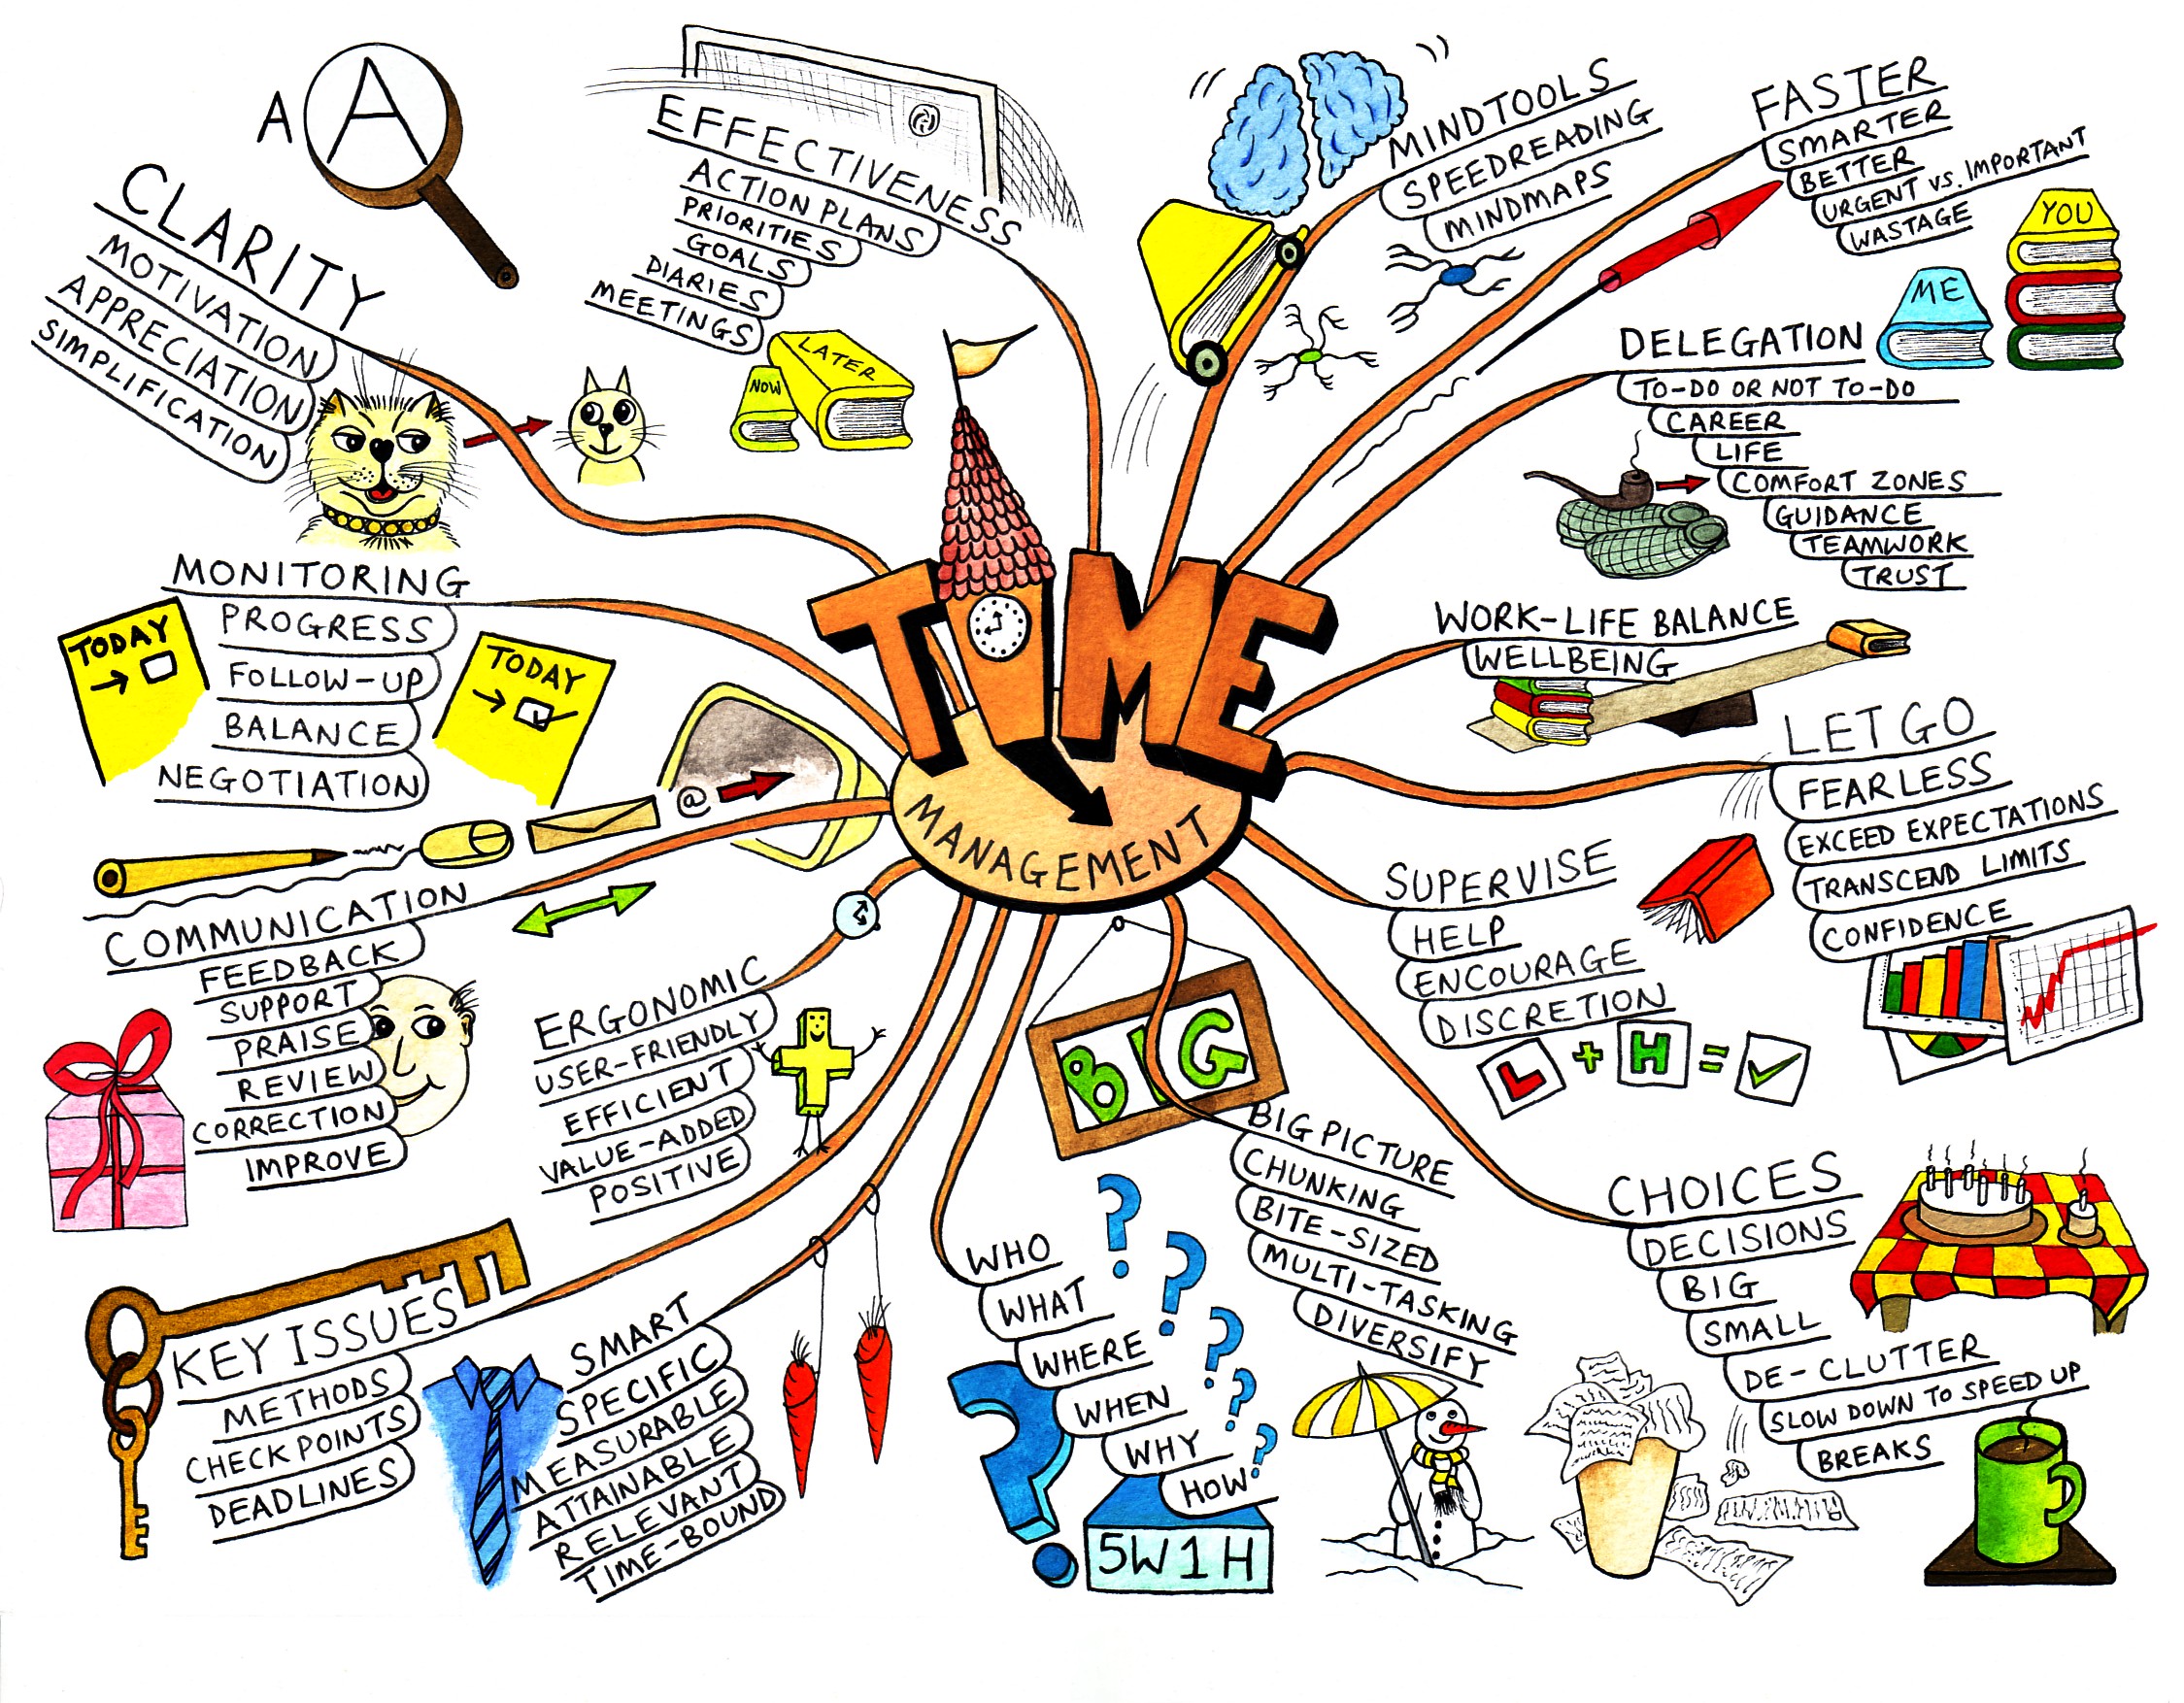 » How to Use Mind Maps To Brainstorm and Organize Ideas